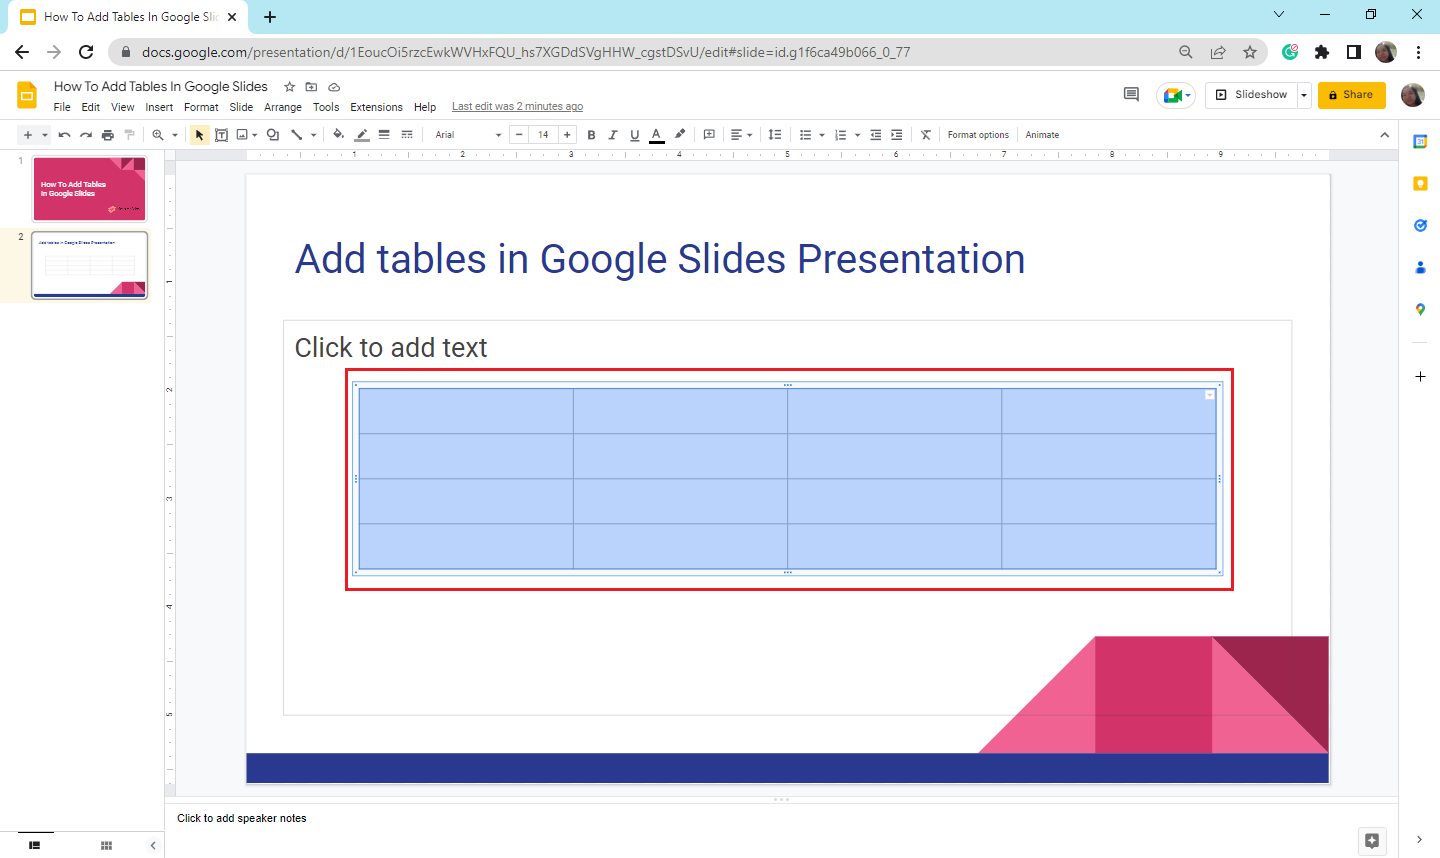 select the table in your presentation and right click it.